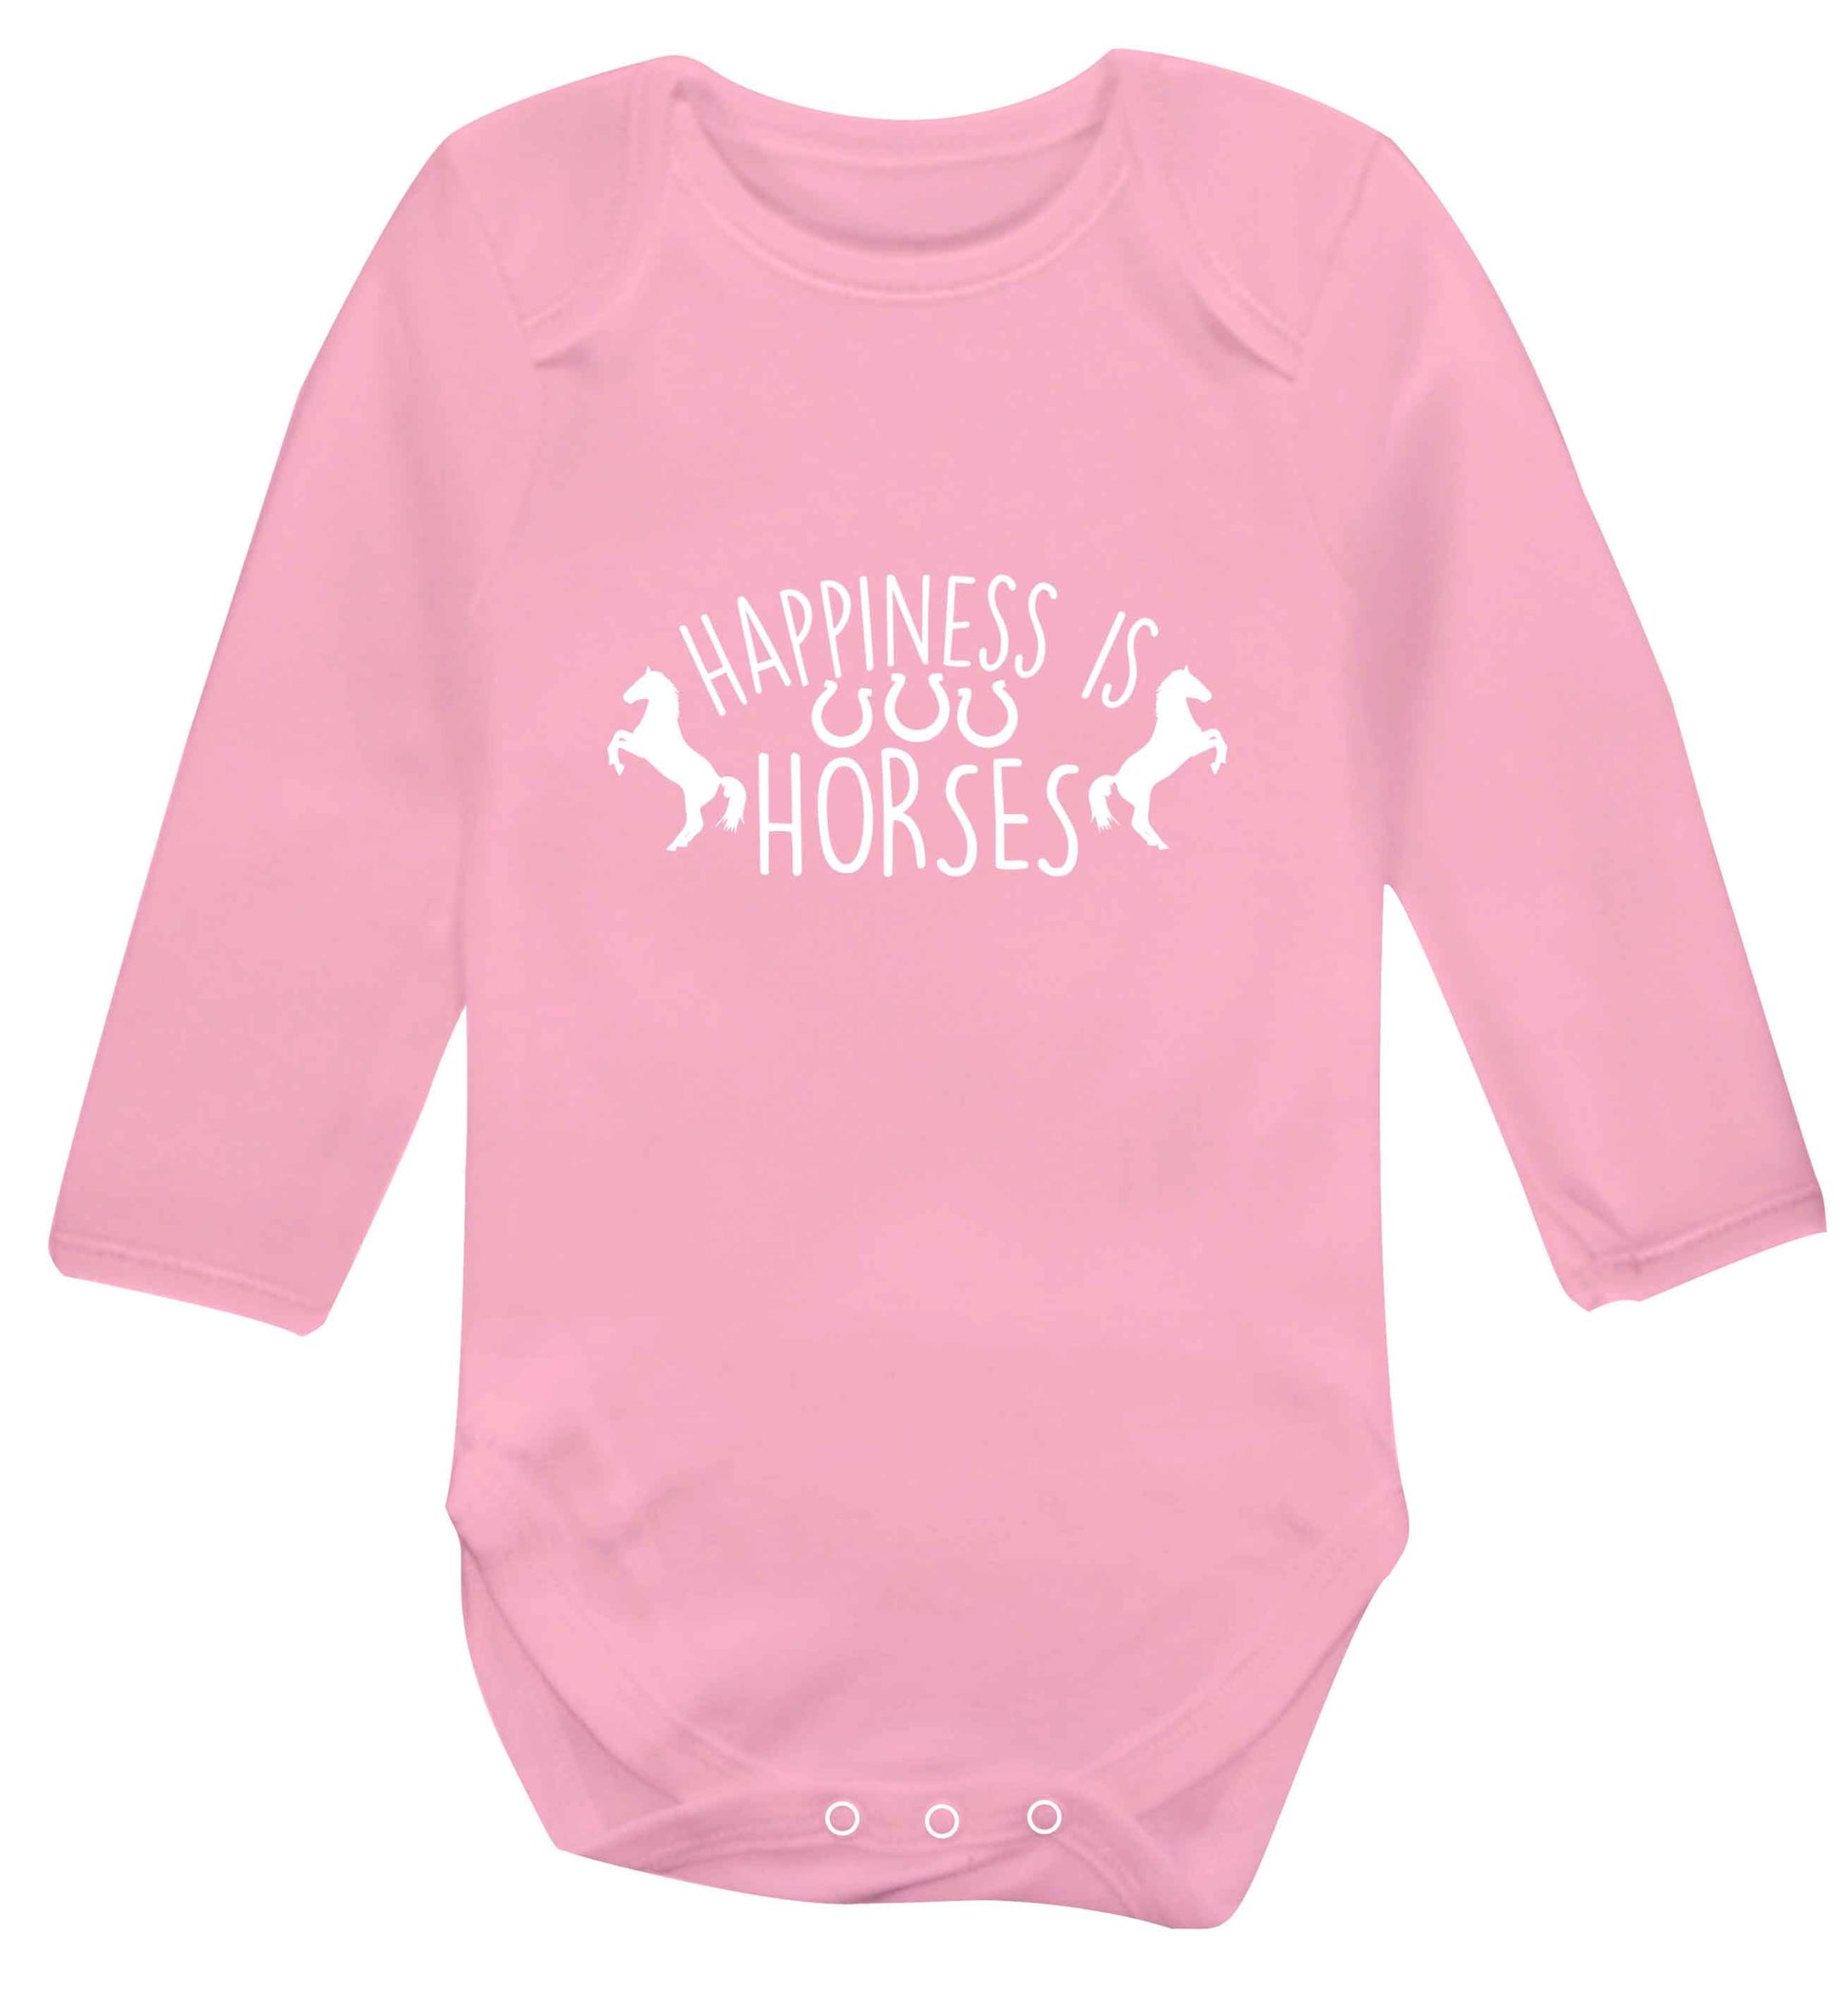 Happiness is horses baby vest long sleeved pale pink 6-12 months